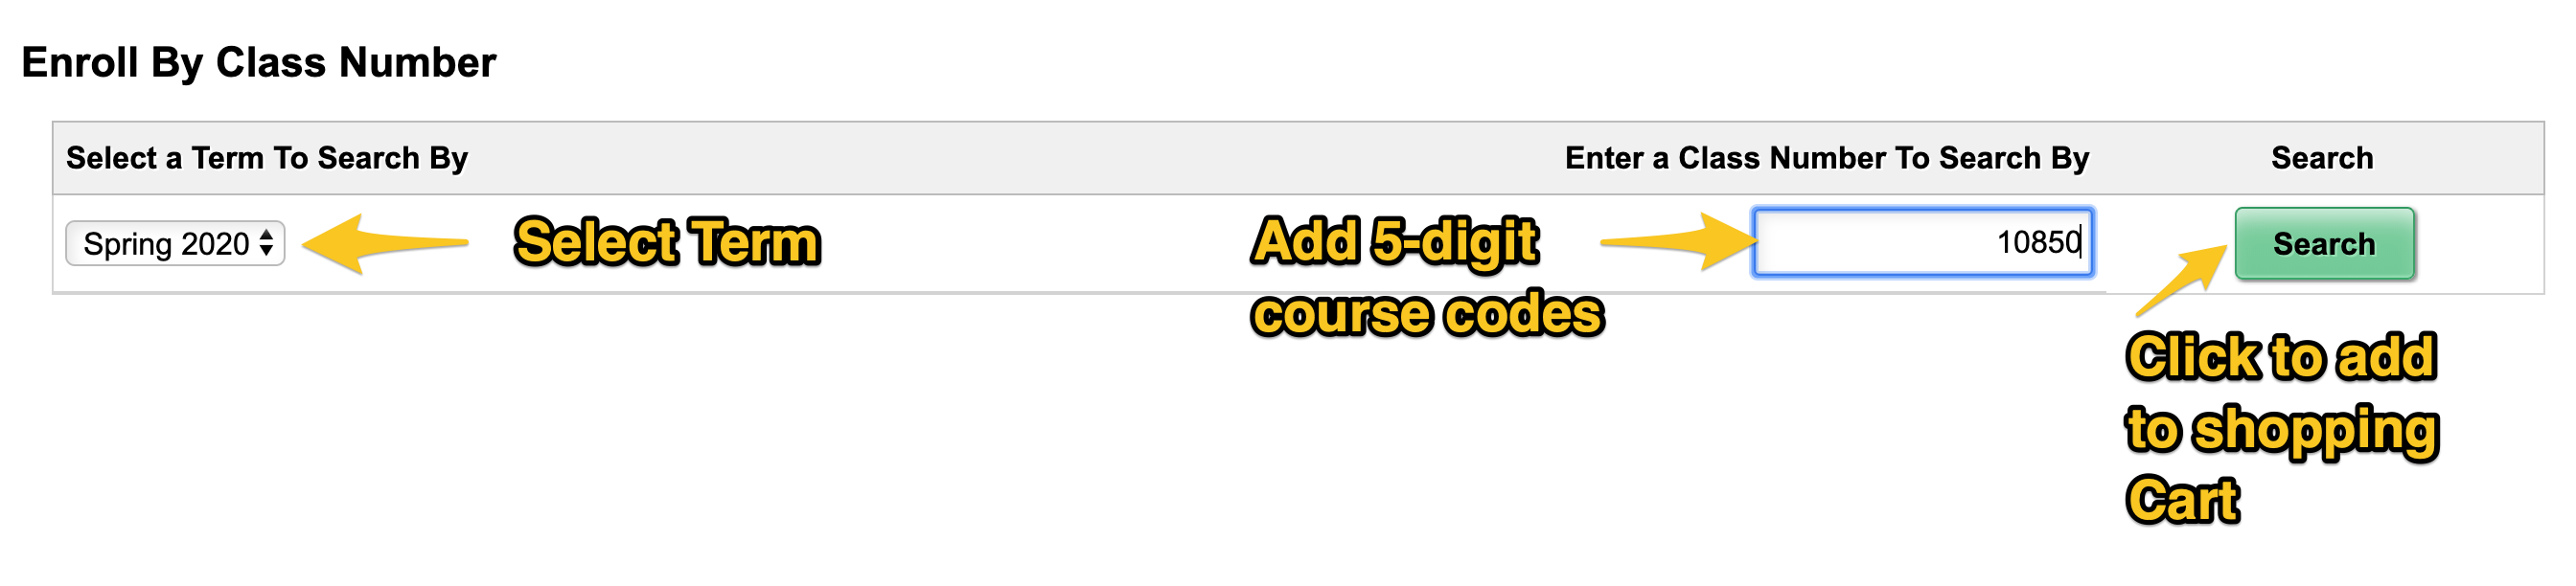 Select “Enroll by Class Number” and add English 1A and English 95 to your cart by inputting the semester and 5-digit course codes. Click to continue.